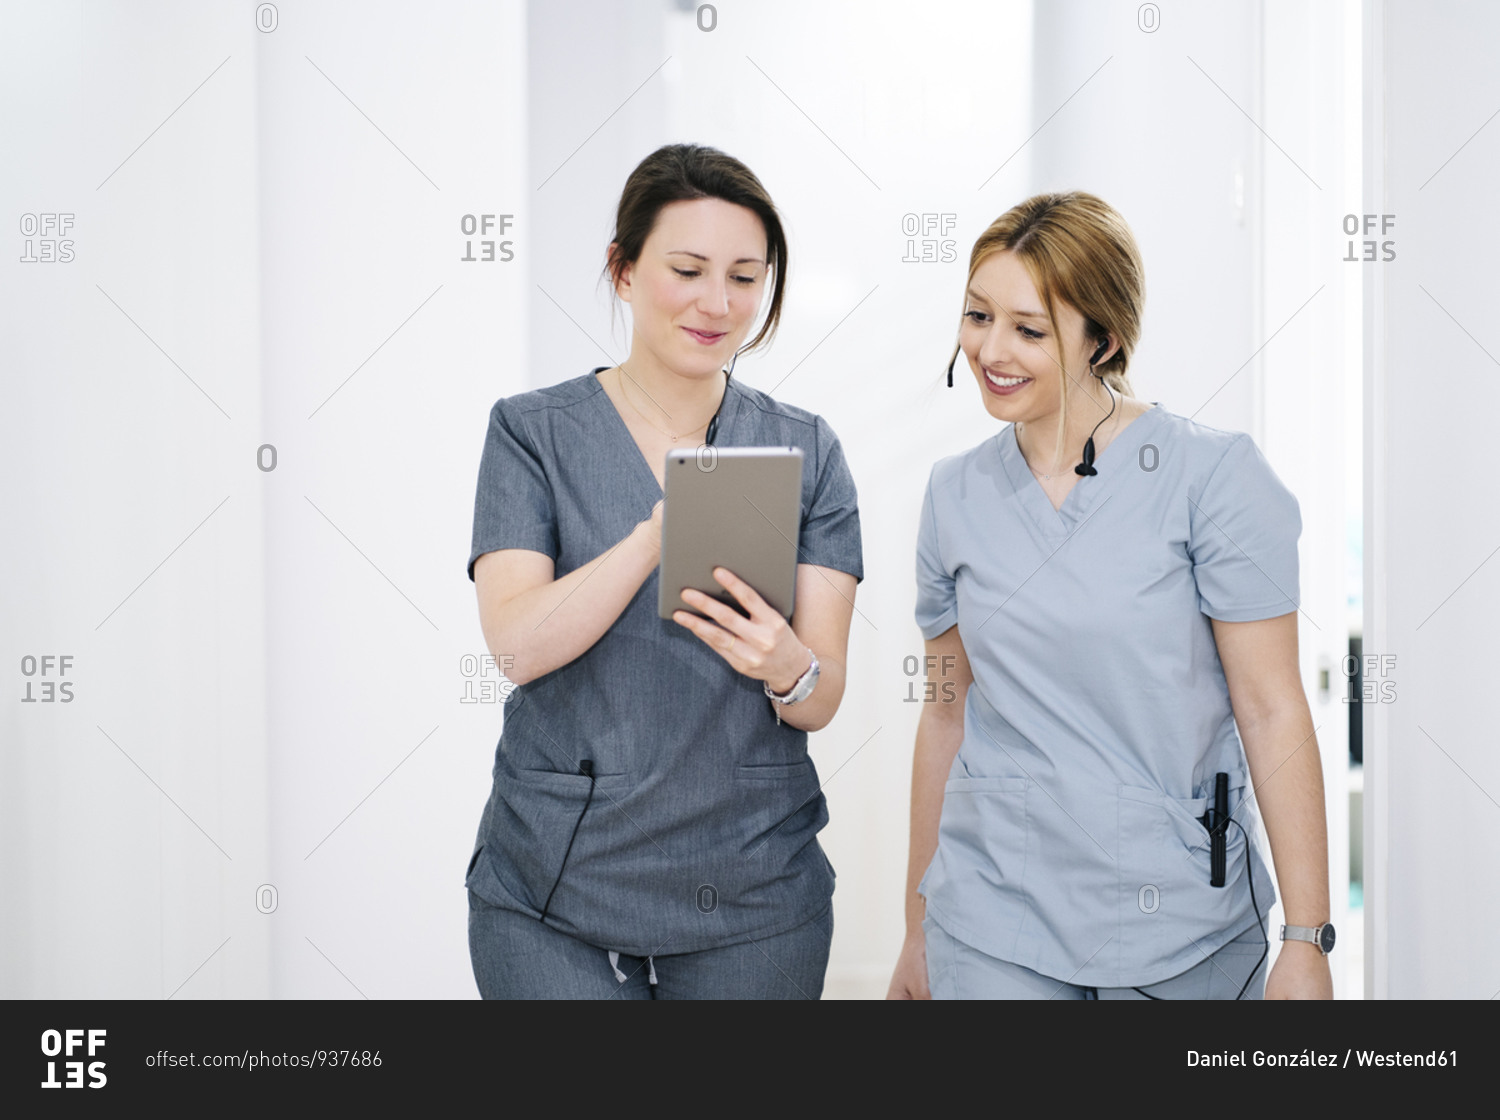 Two medical secretaries with headset and tablet in medical practice